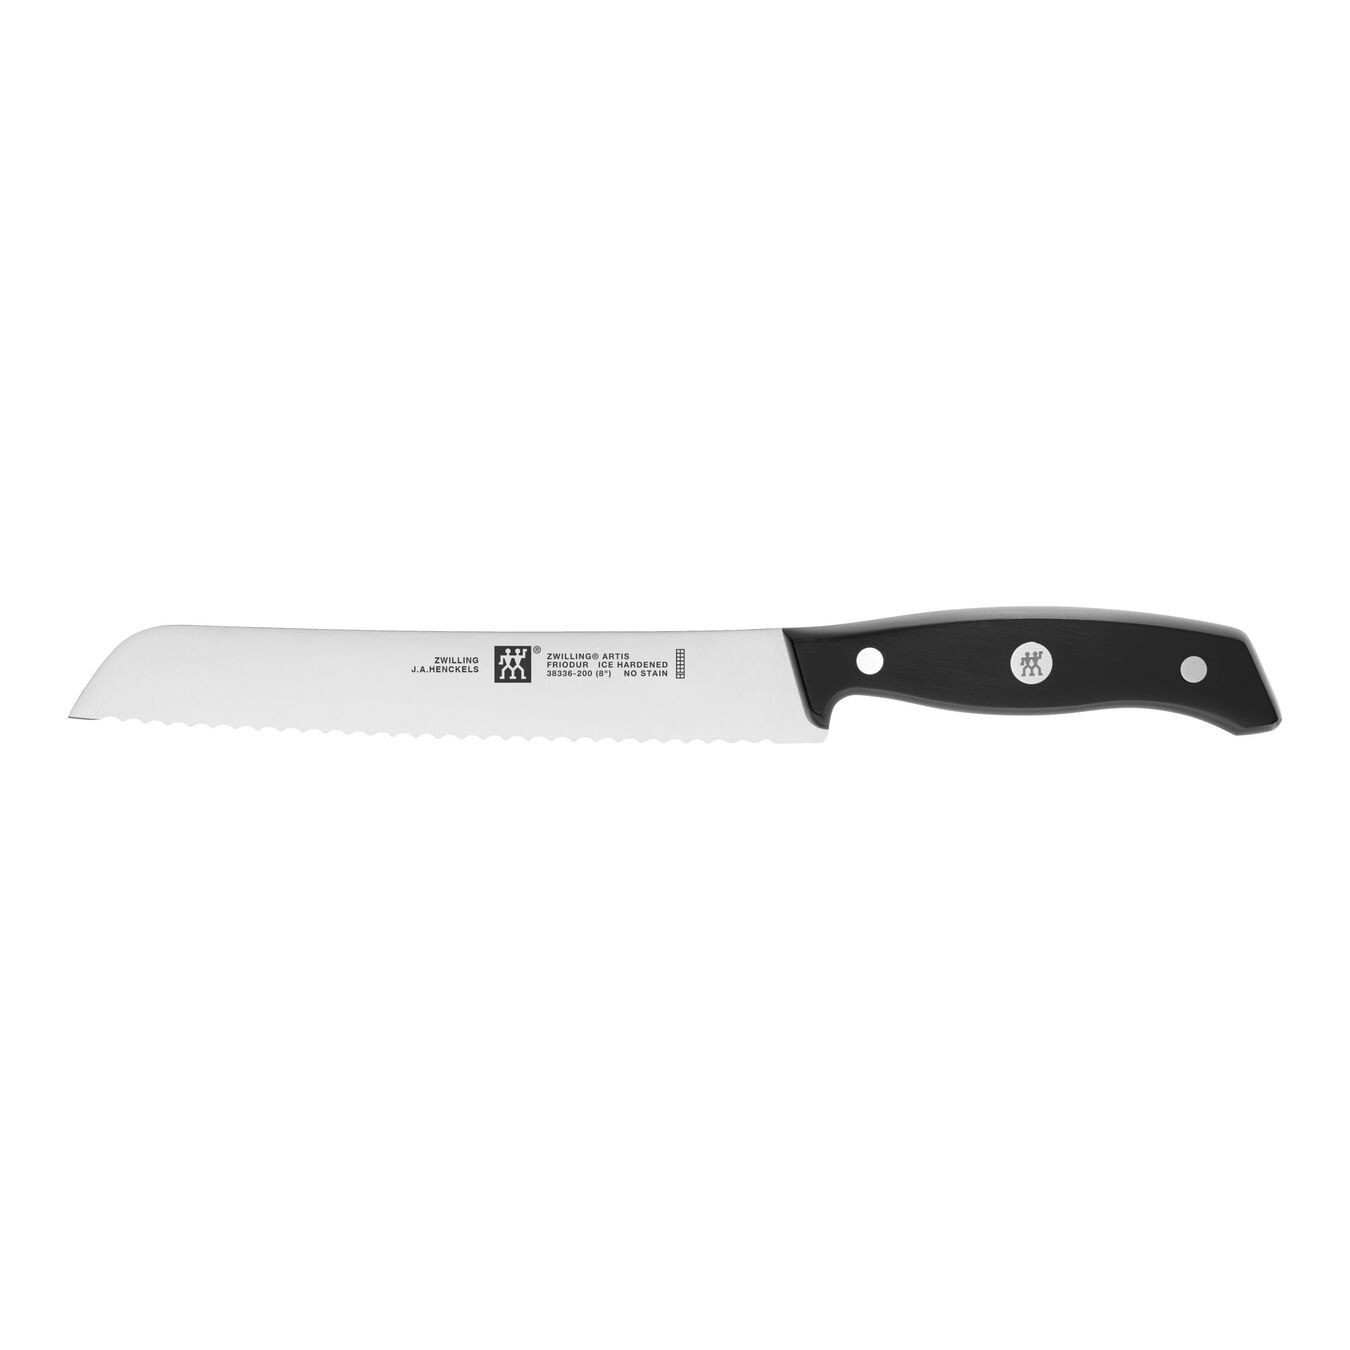 ZWILLING BREAD KNIFE - STAINLESS STEEL - 20CM 38336-201